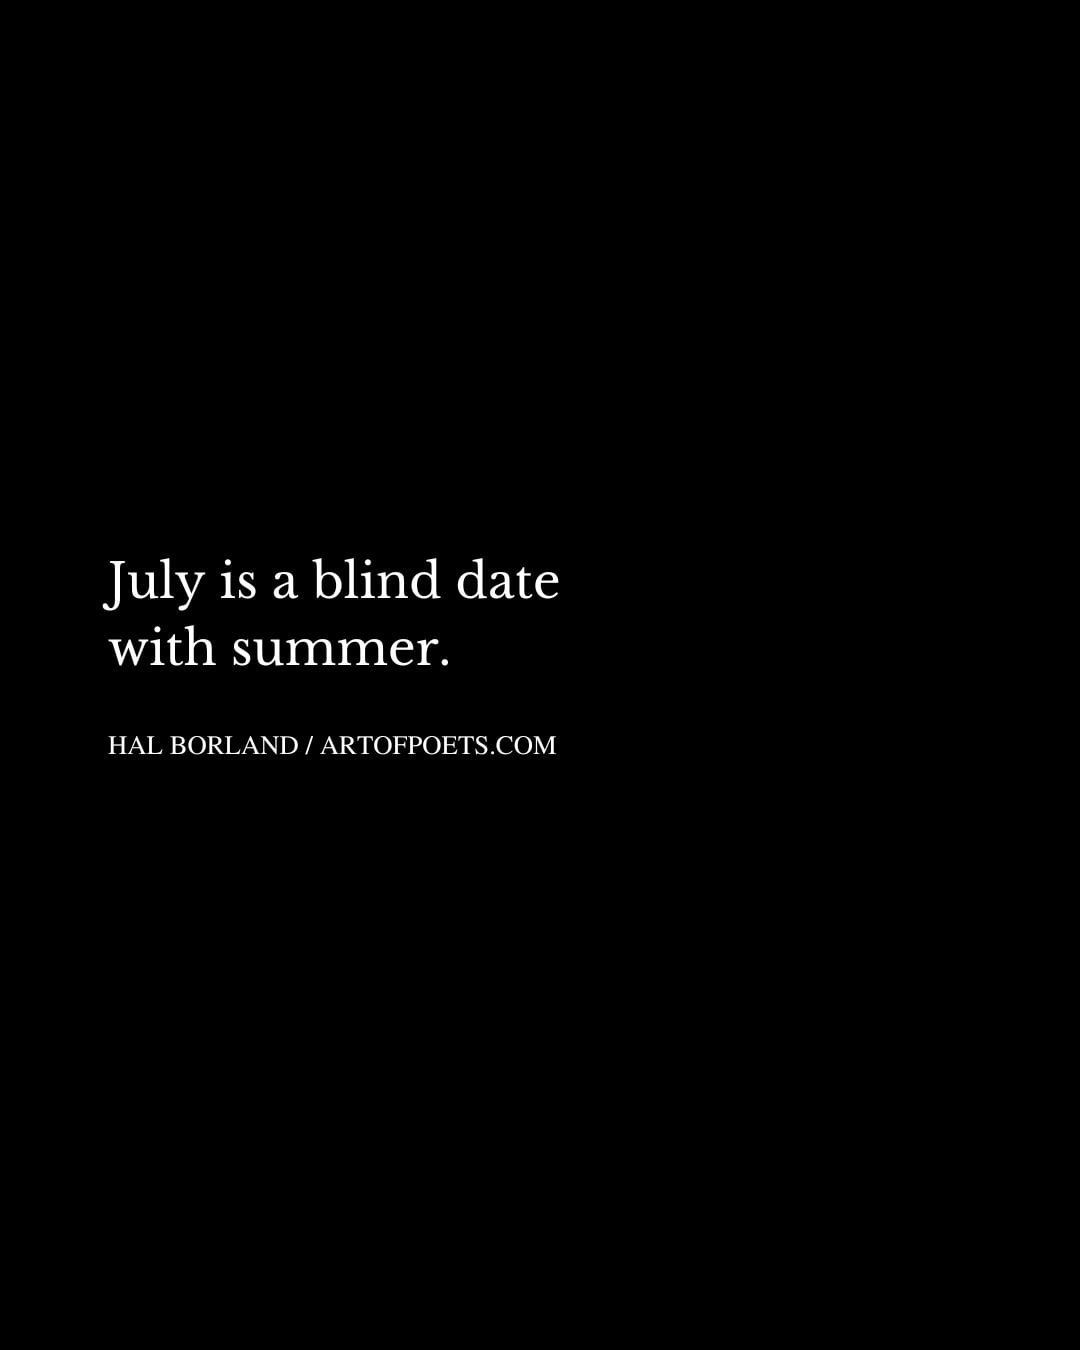 July is a blind date with summer